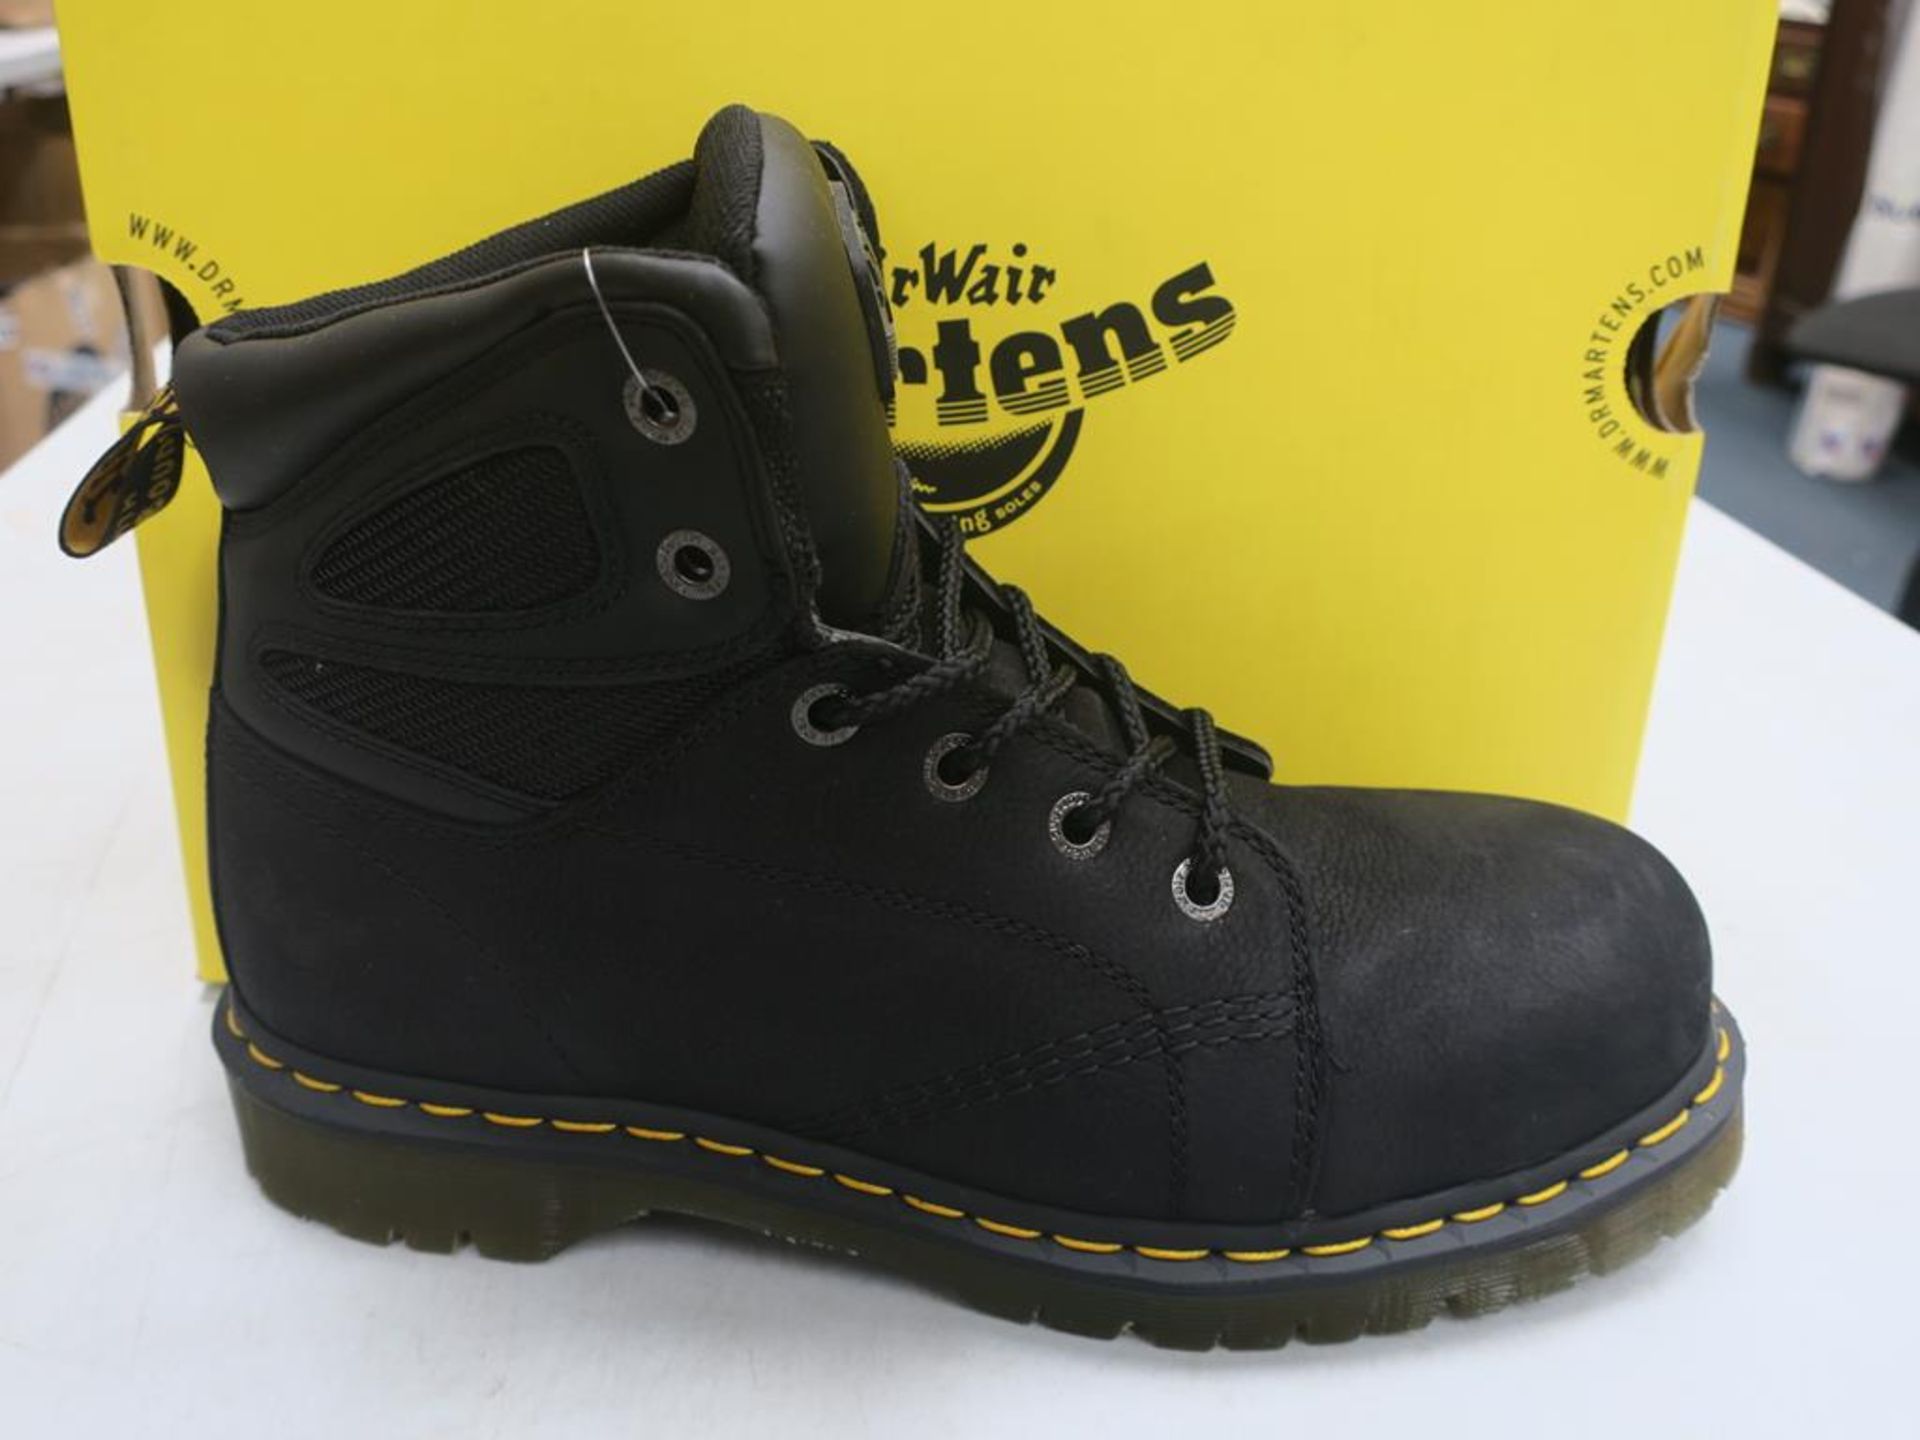 * A pair of New/Boxed Dr Martens Boots, Fairleigh ST, Overlord, 21046001, in black, UK size 10